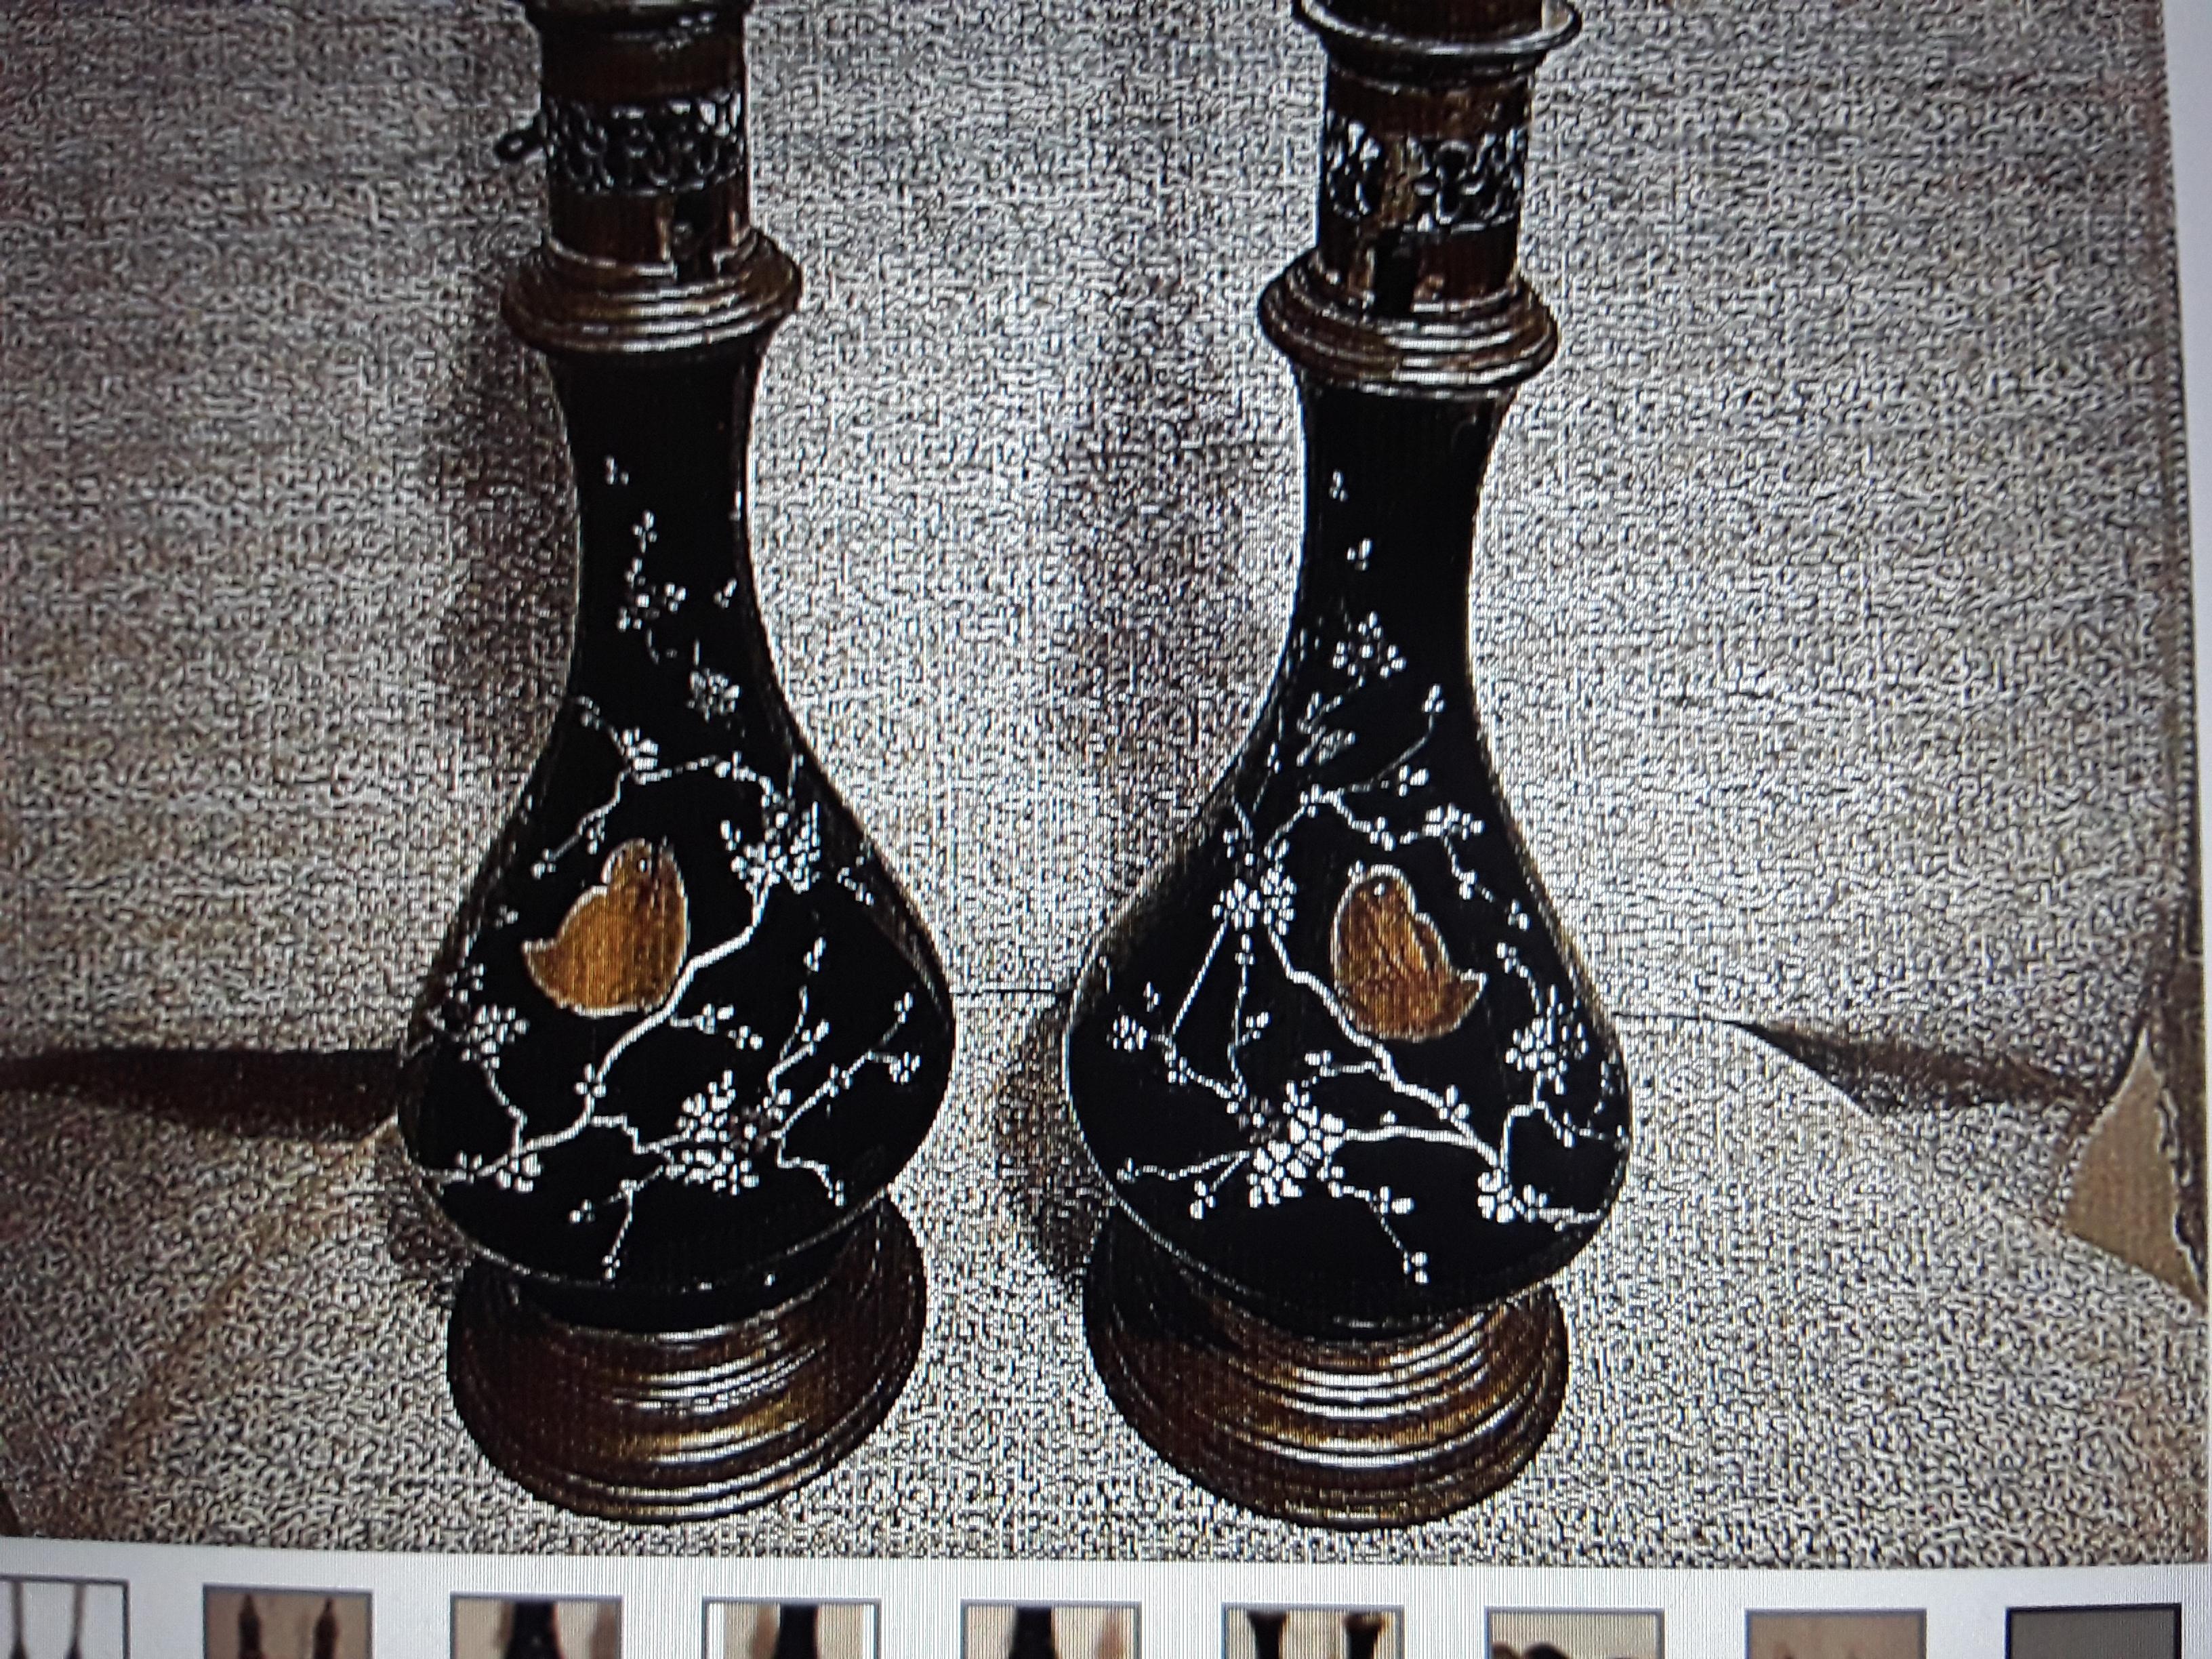 Pair 1870's Baltic Black Opaline Art Glass Oil Table Lamps with Glass Chimney. Detailed love birds in cherry blossom trees decor. These are beautiful and are in their original state. These are oil lamps that would need to be converted to electric if